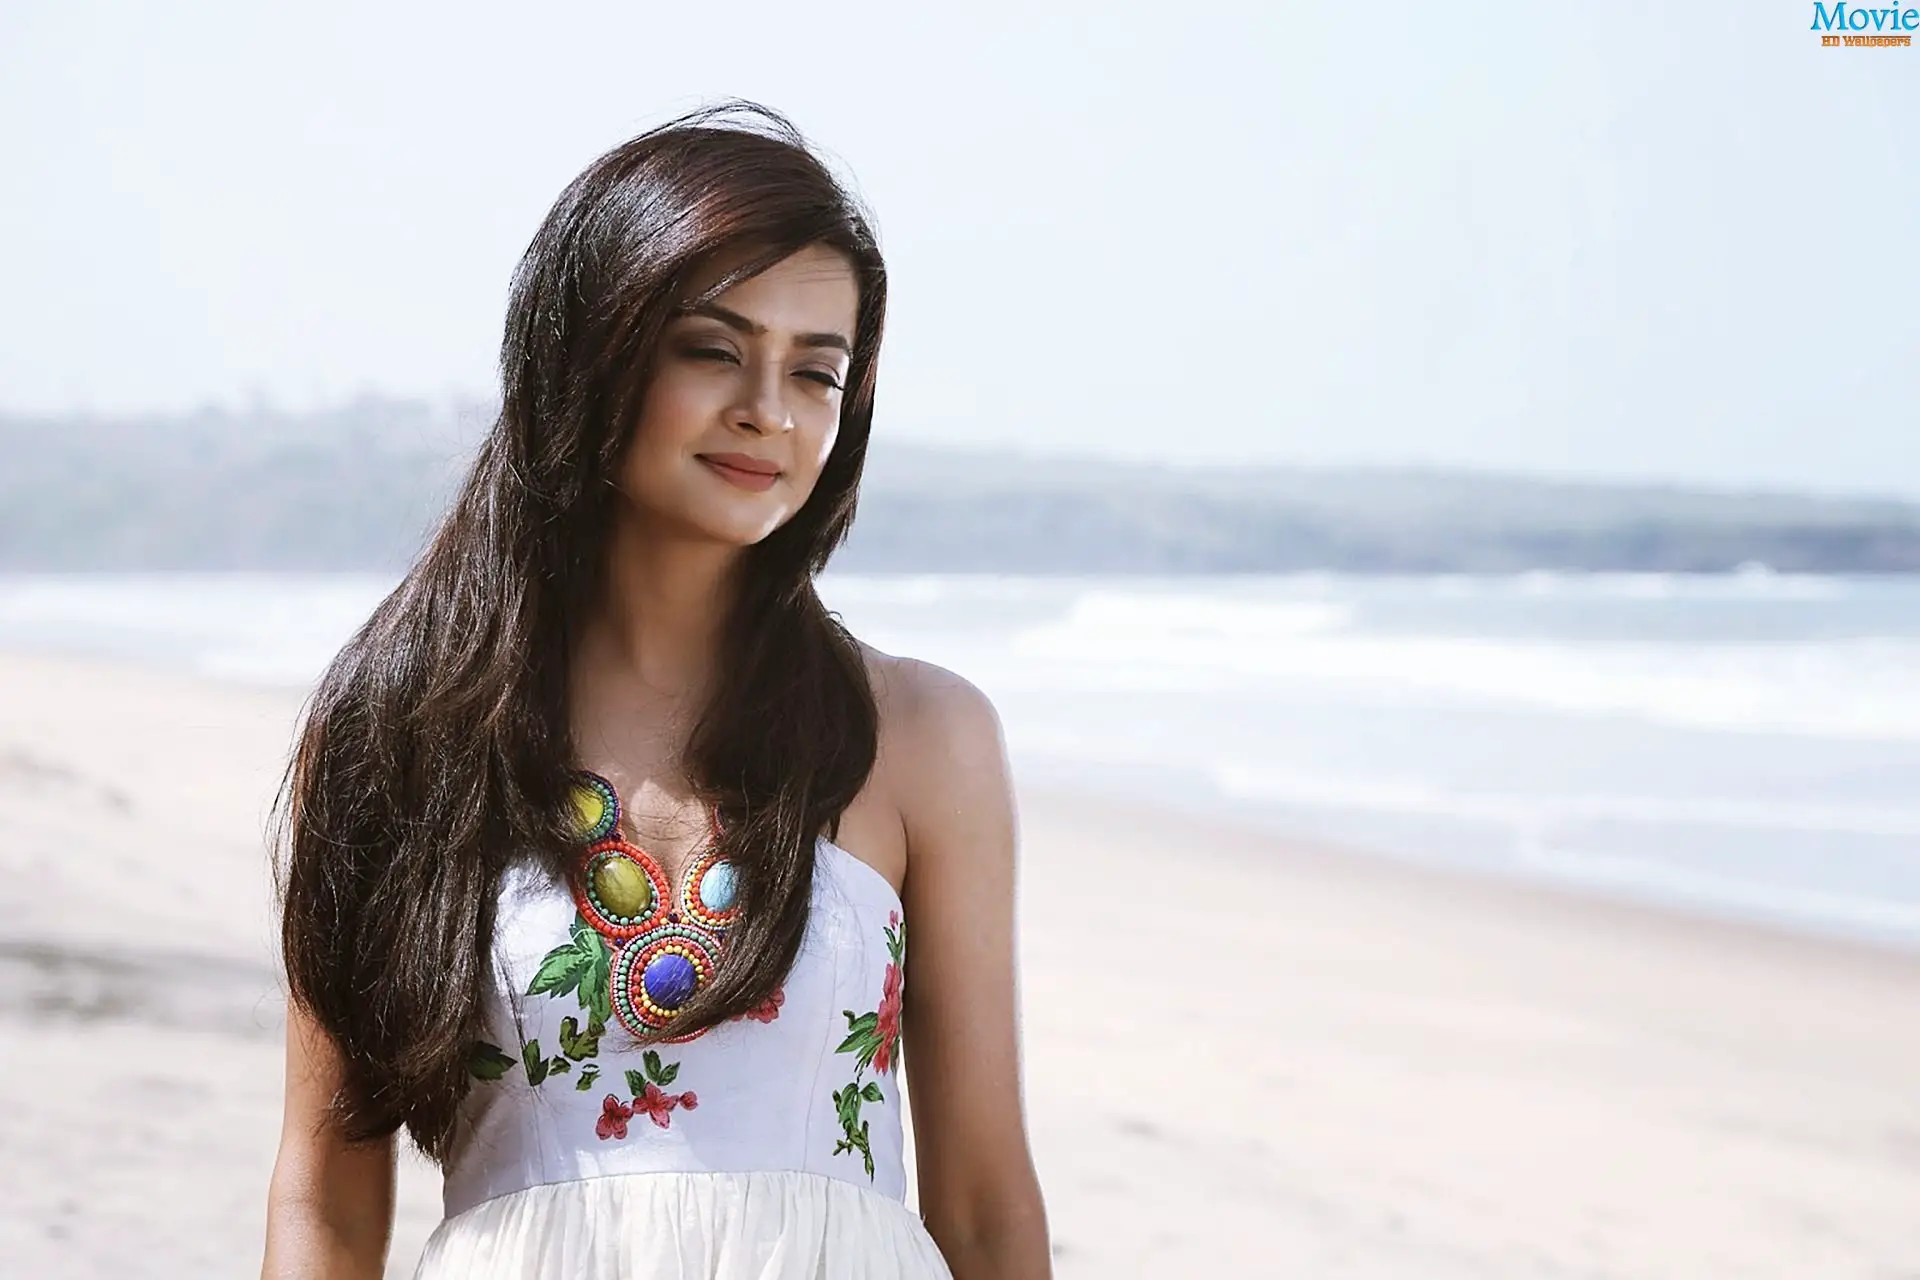 Hate Story 2 Actress Surveen Chawla